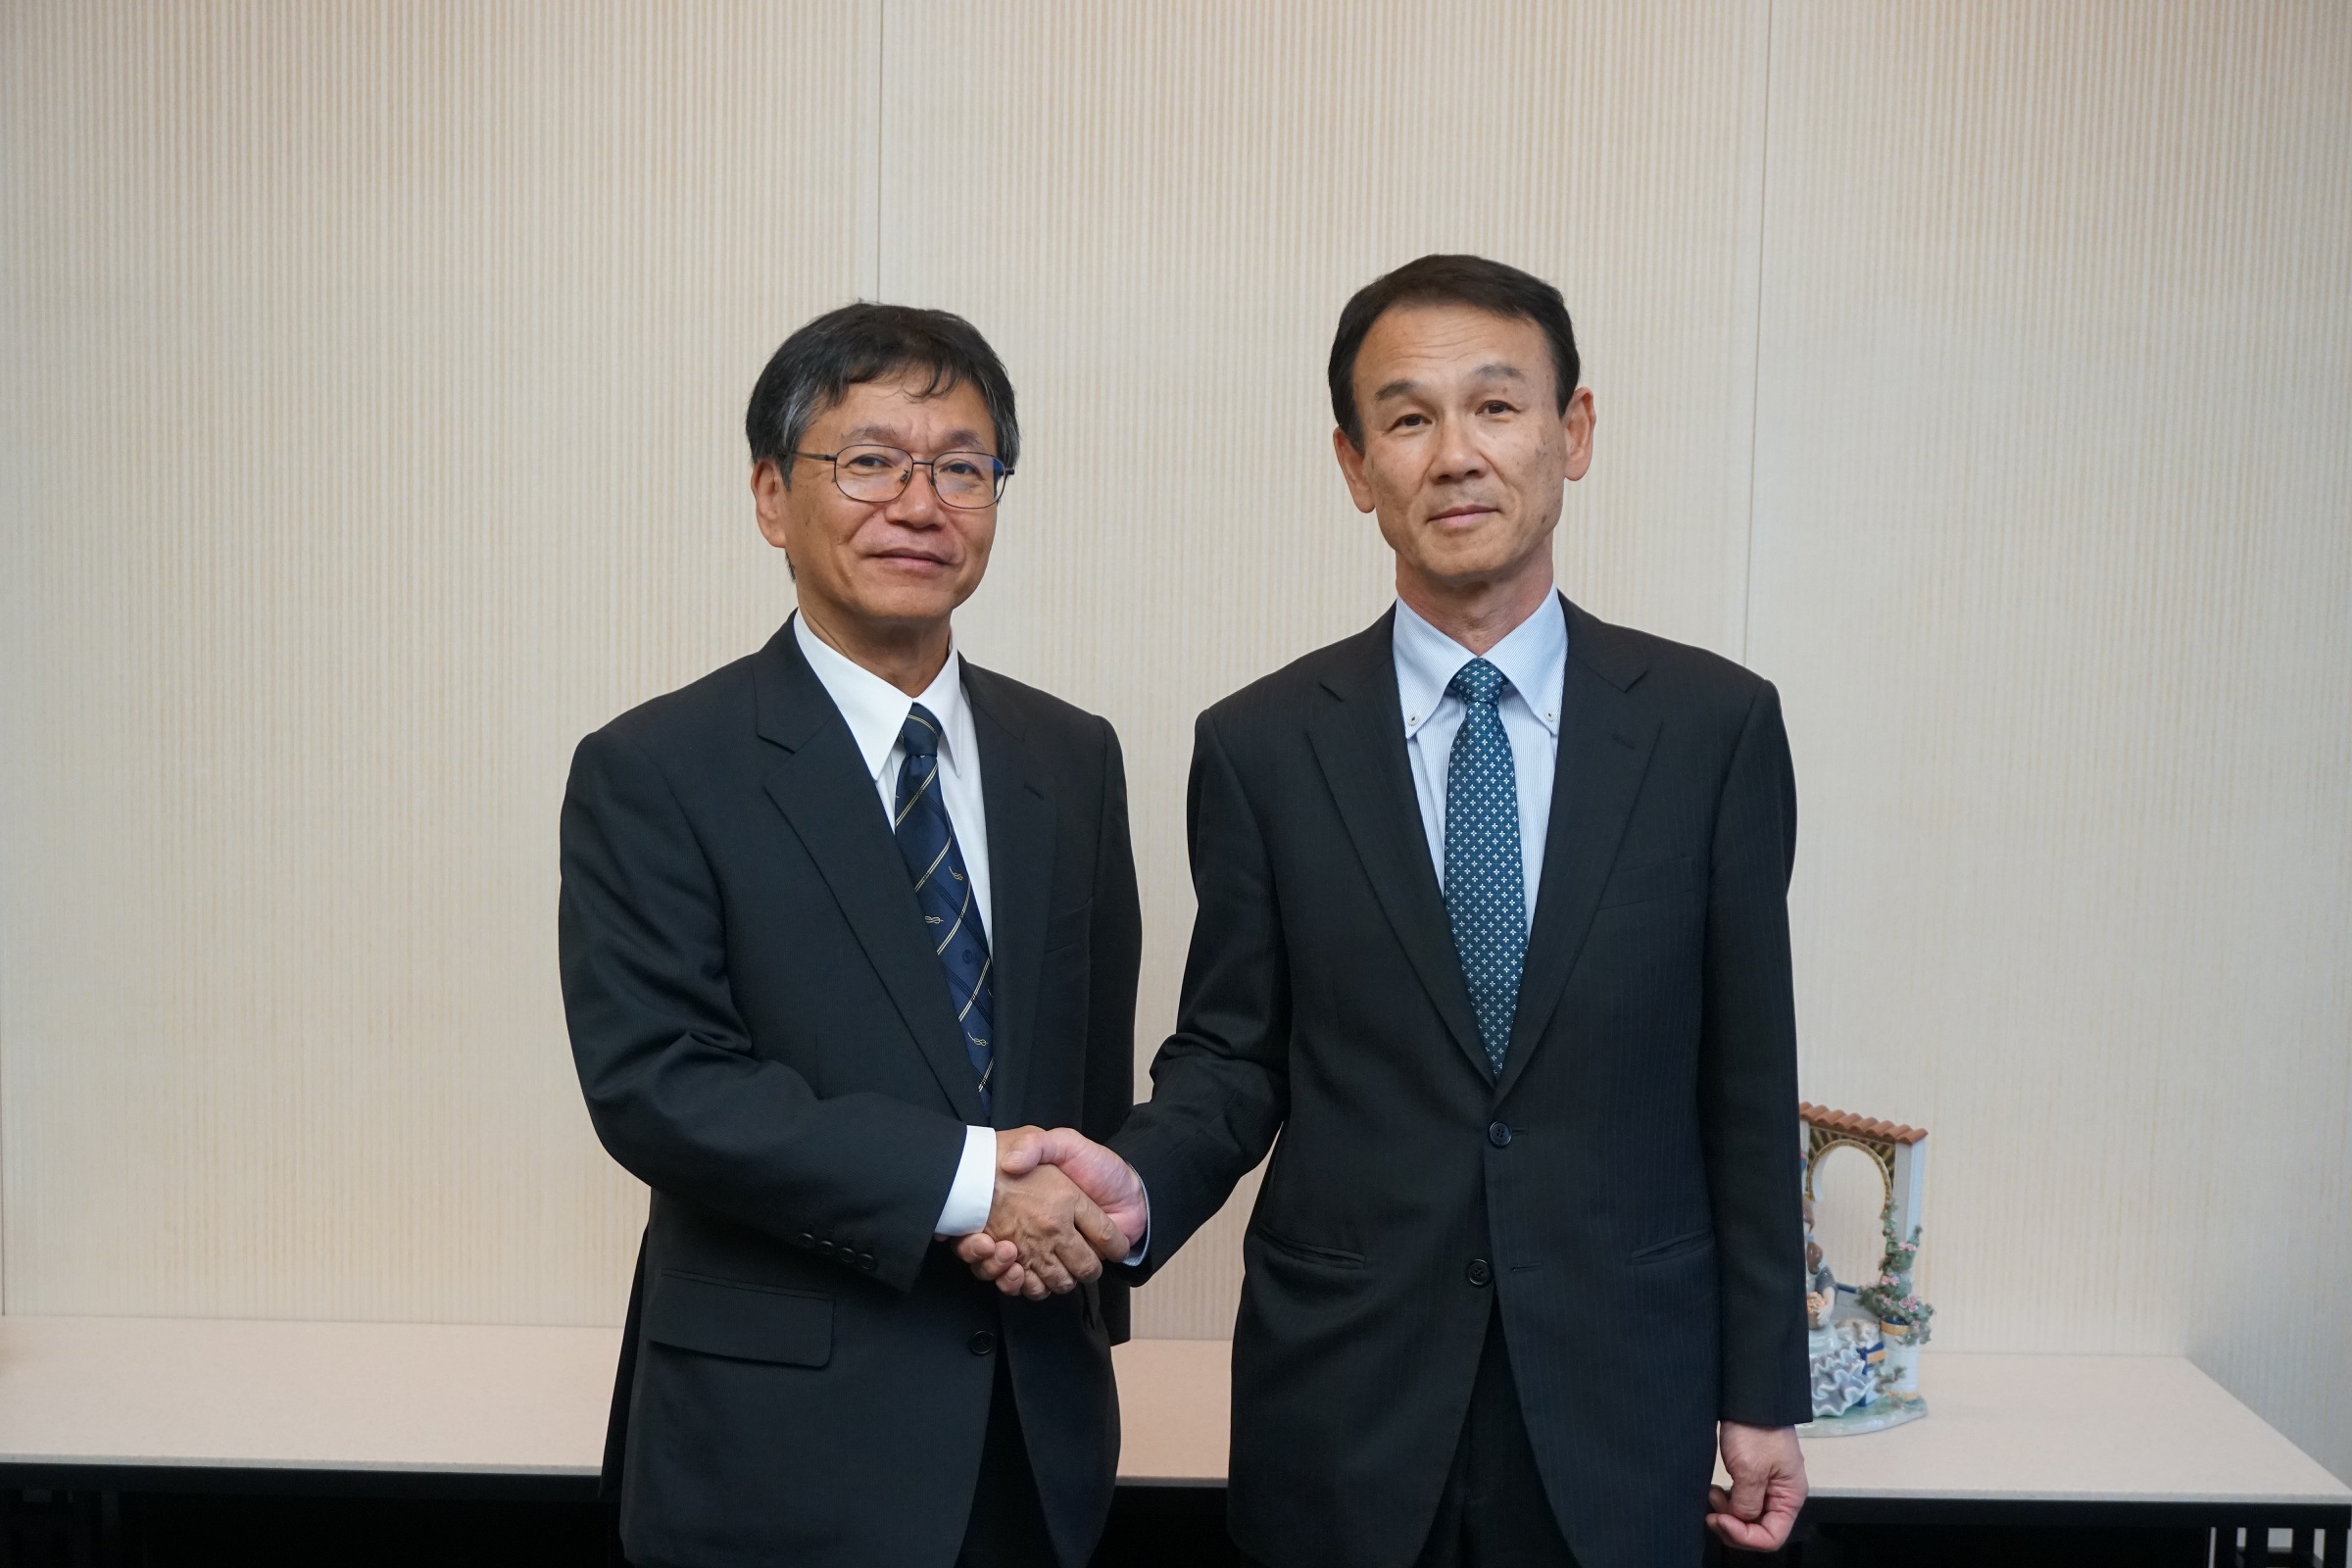 TSUNEISHI SHIPBUILDING Signs a Business Cooperation Agreement with 
Mitsui E&S Shipbuilding in the Commercial Ship Business Area